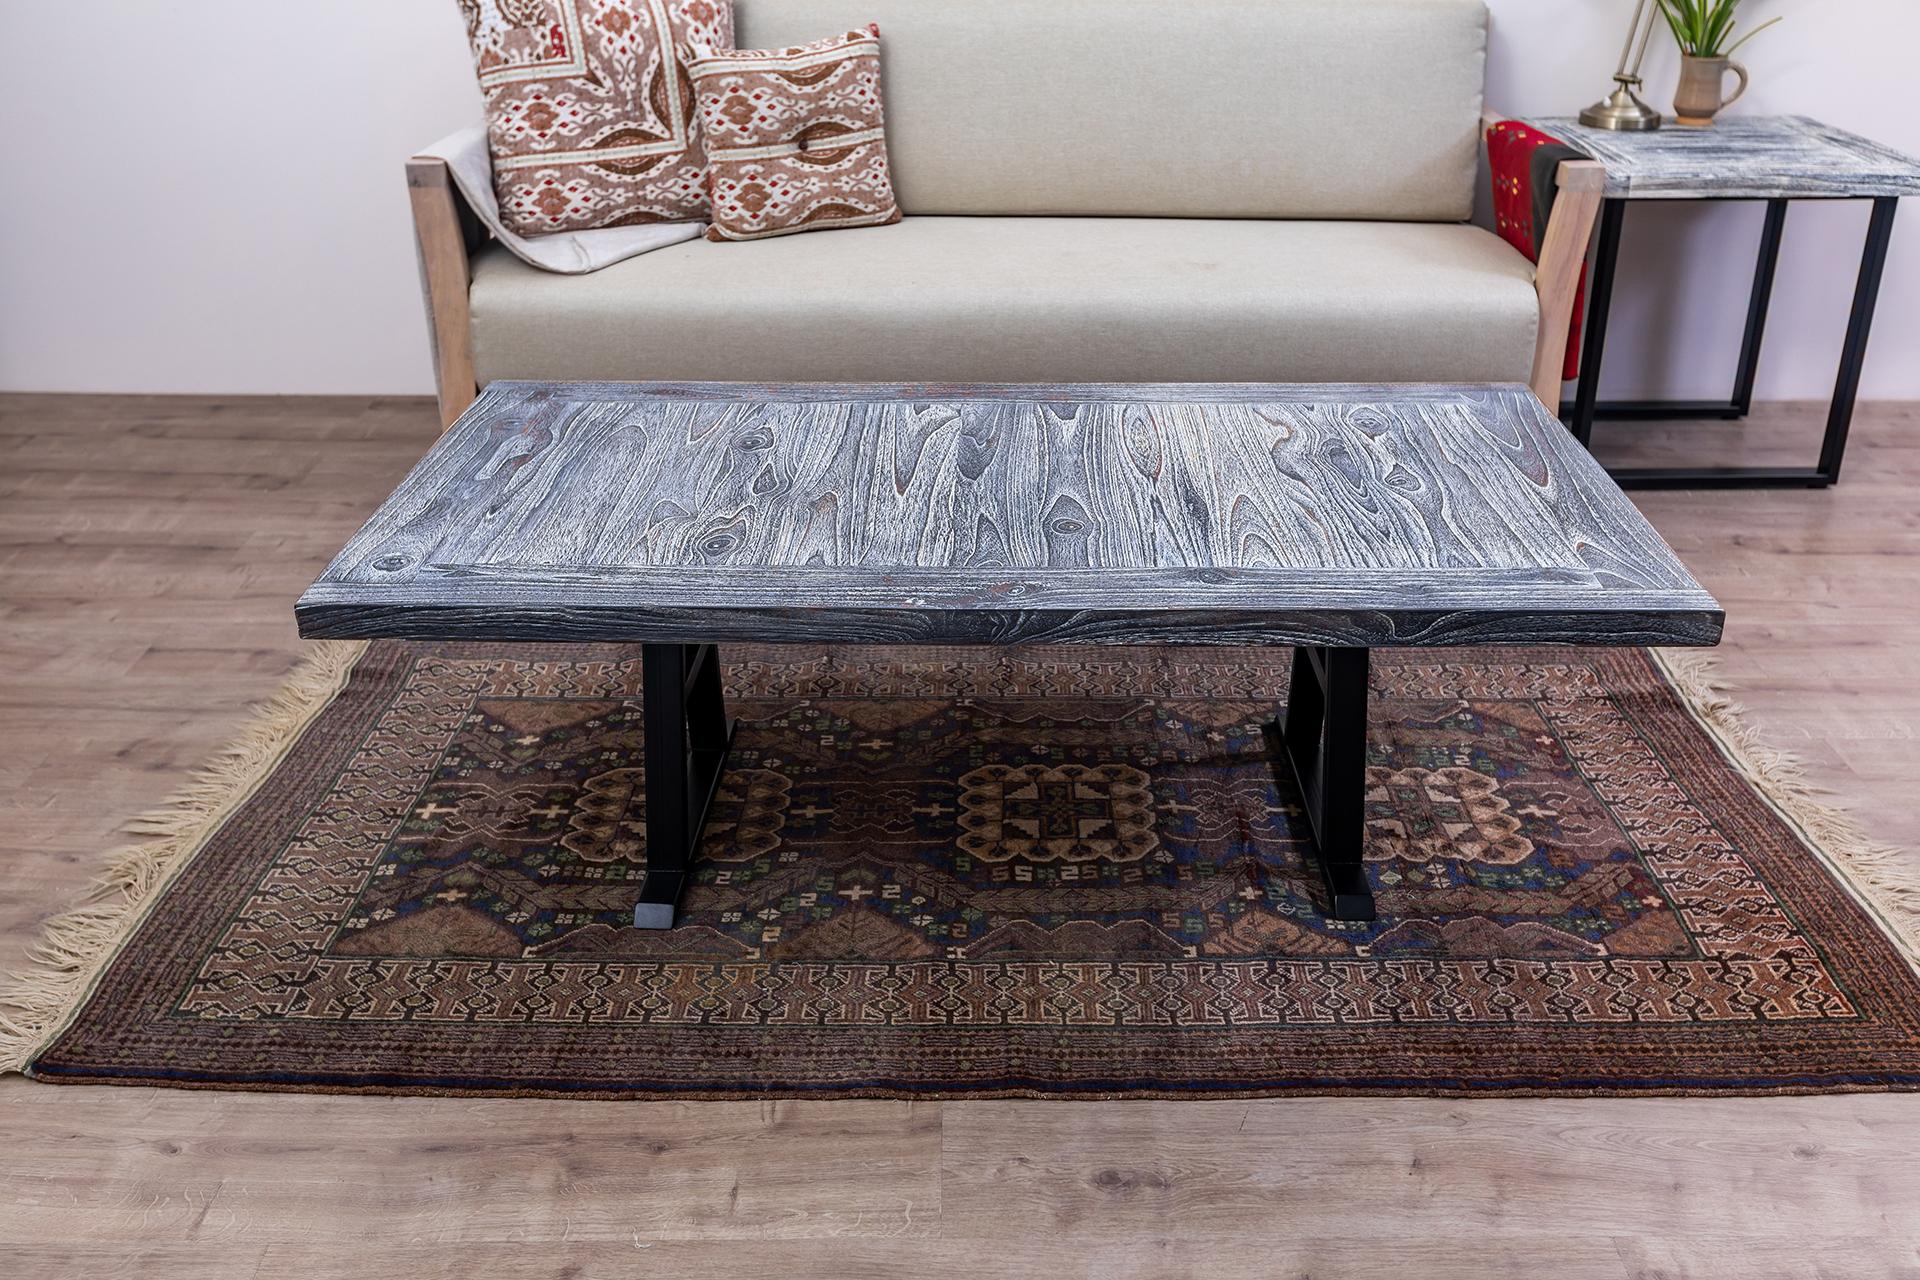 Hand-Crafted Solid Teak Coffee Table in a Weathered Distressed Finish For Sale